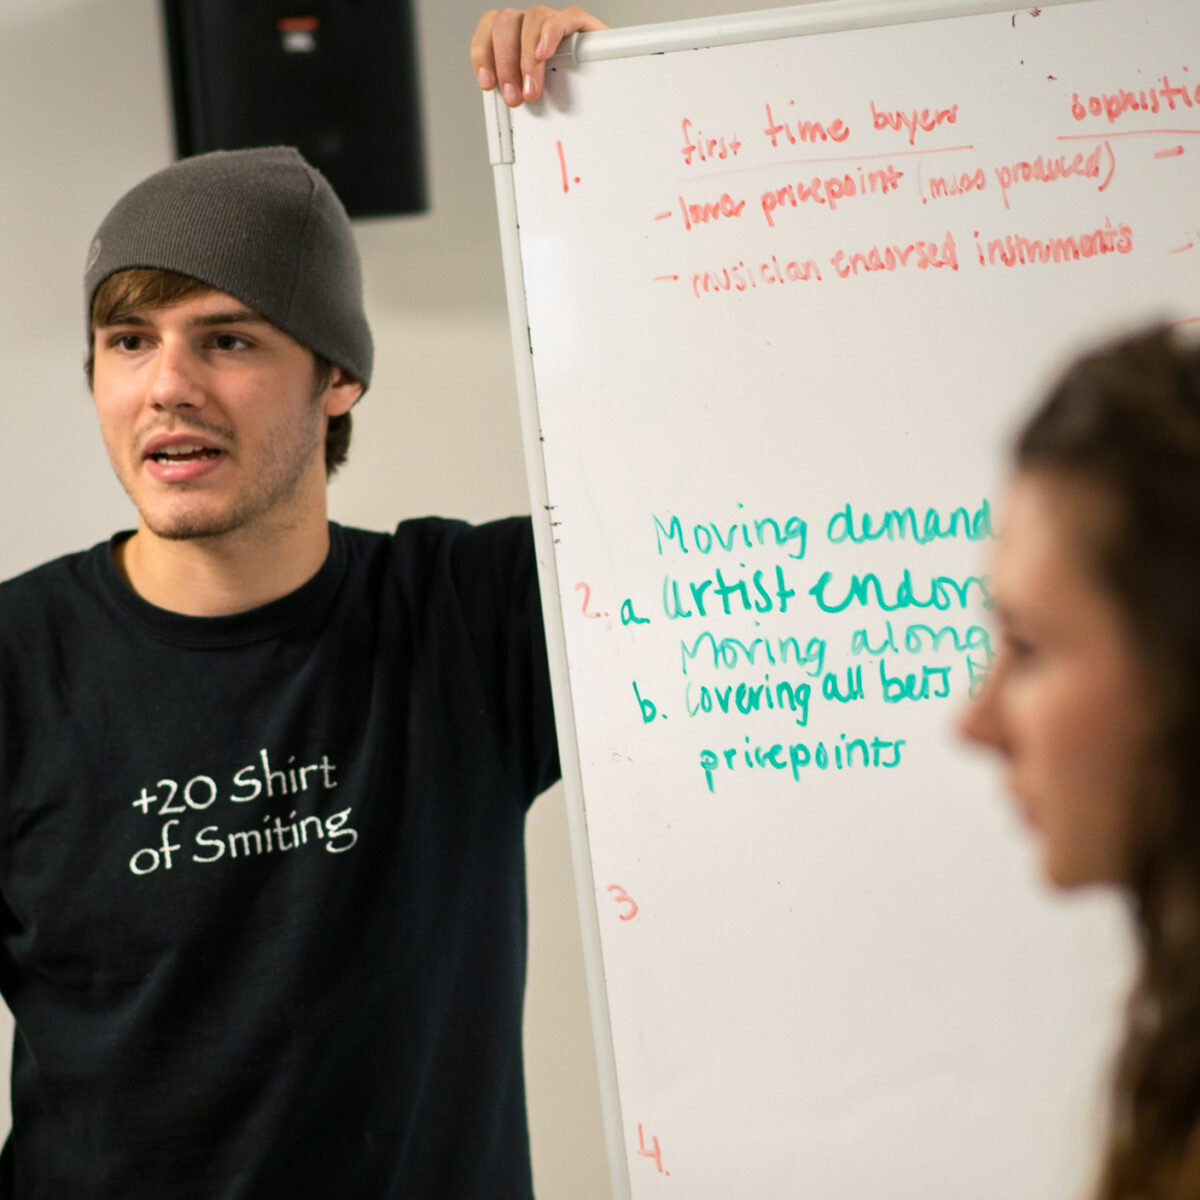 a student presents his ideas on a white board for the class to see